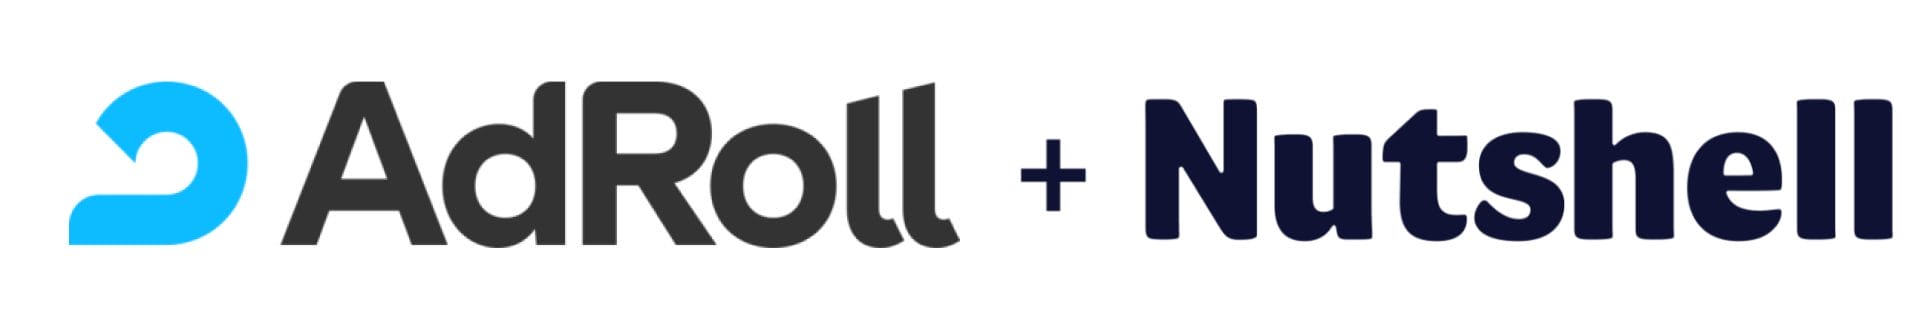 adroll and nutshell logos integration graphic